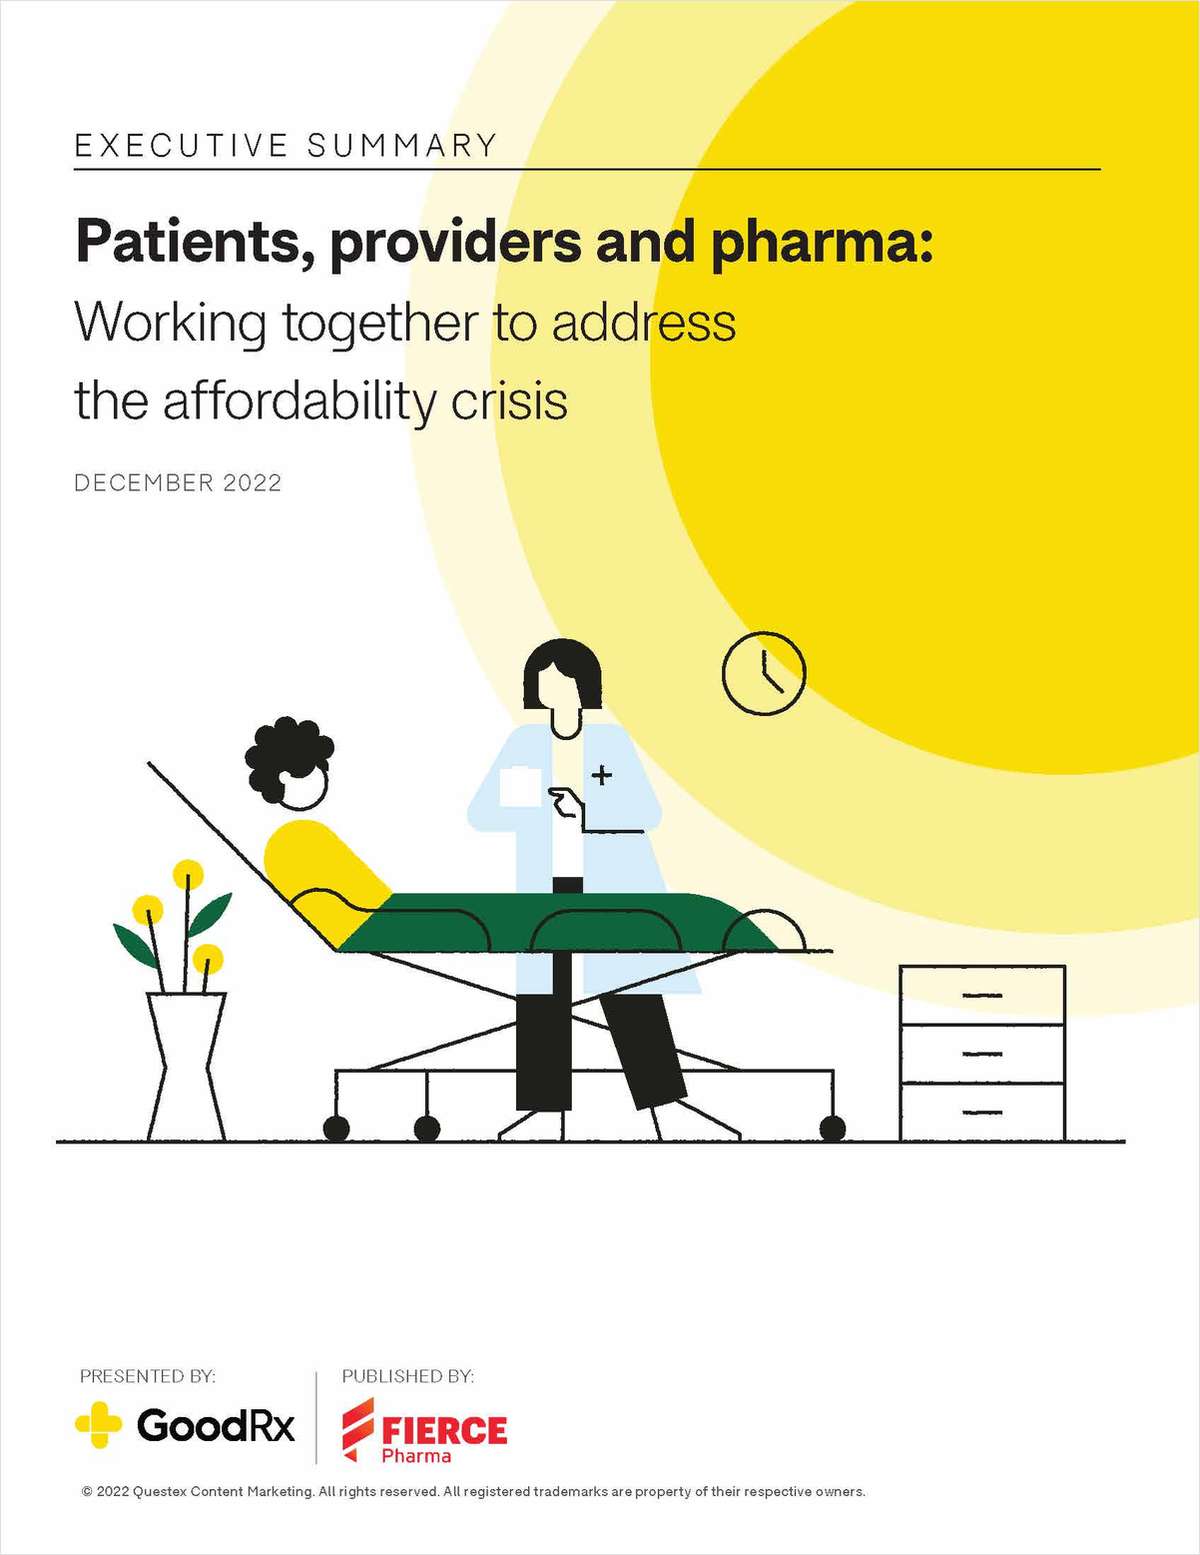 Patients, providers and pharma: Working together to address the affordability crisis